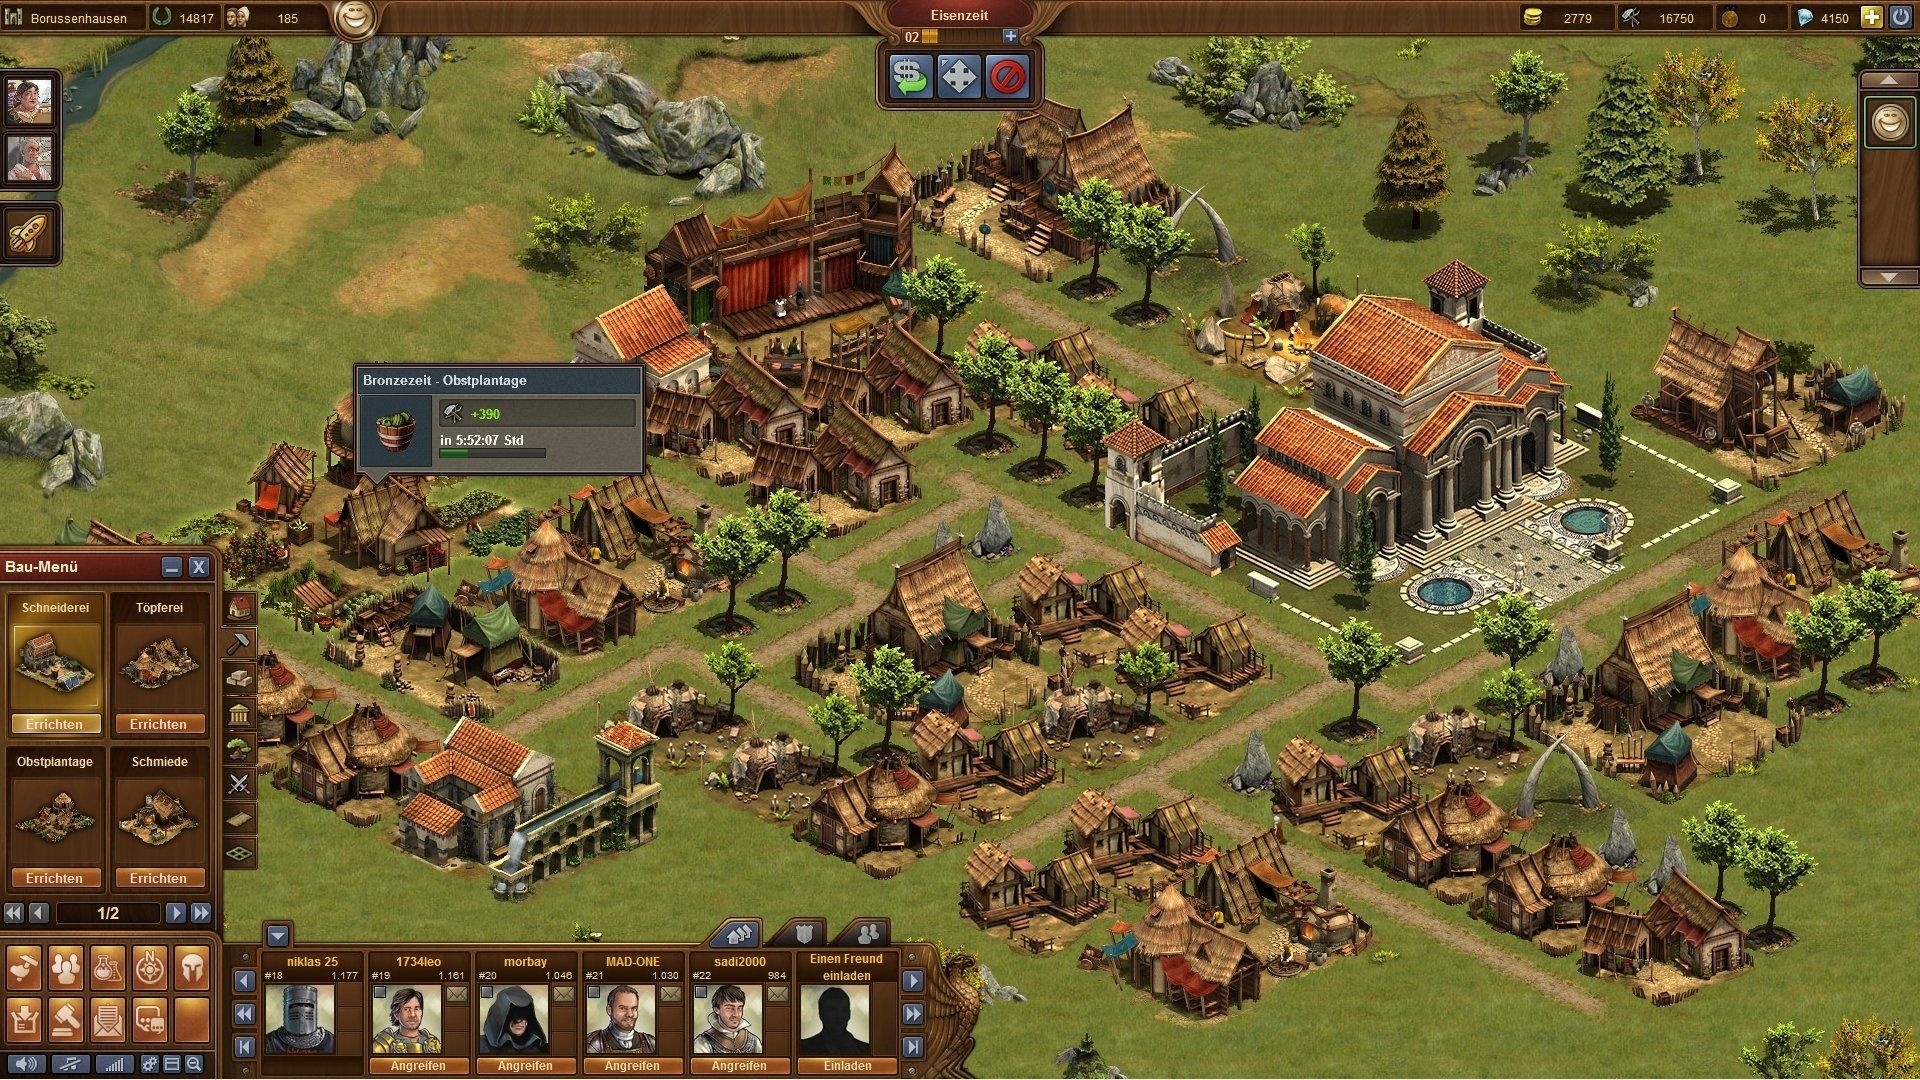 forge of empires us forum